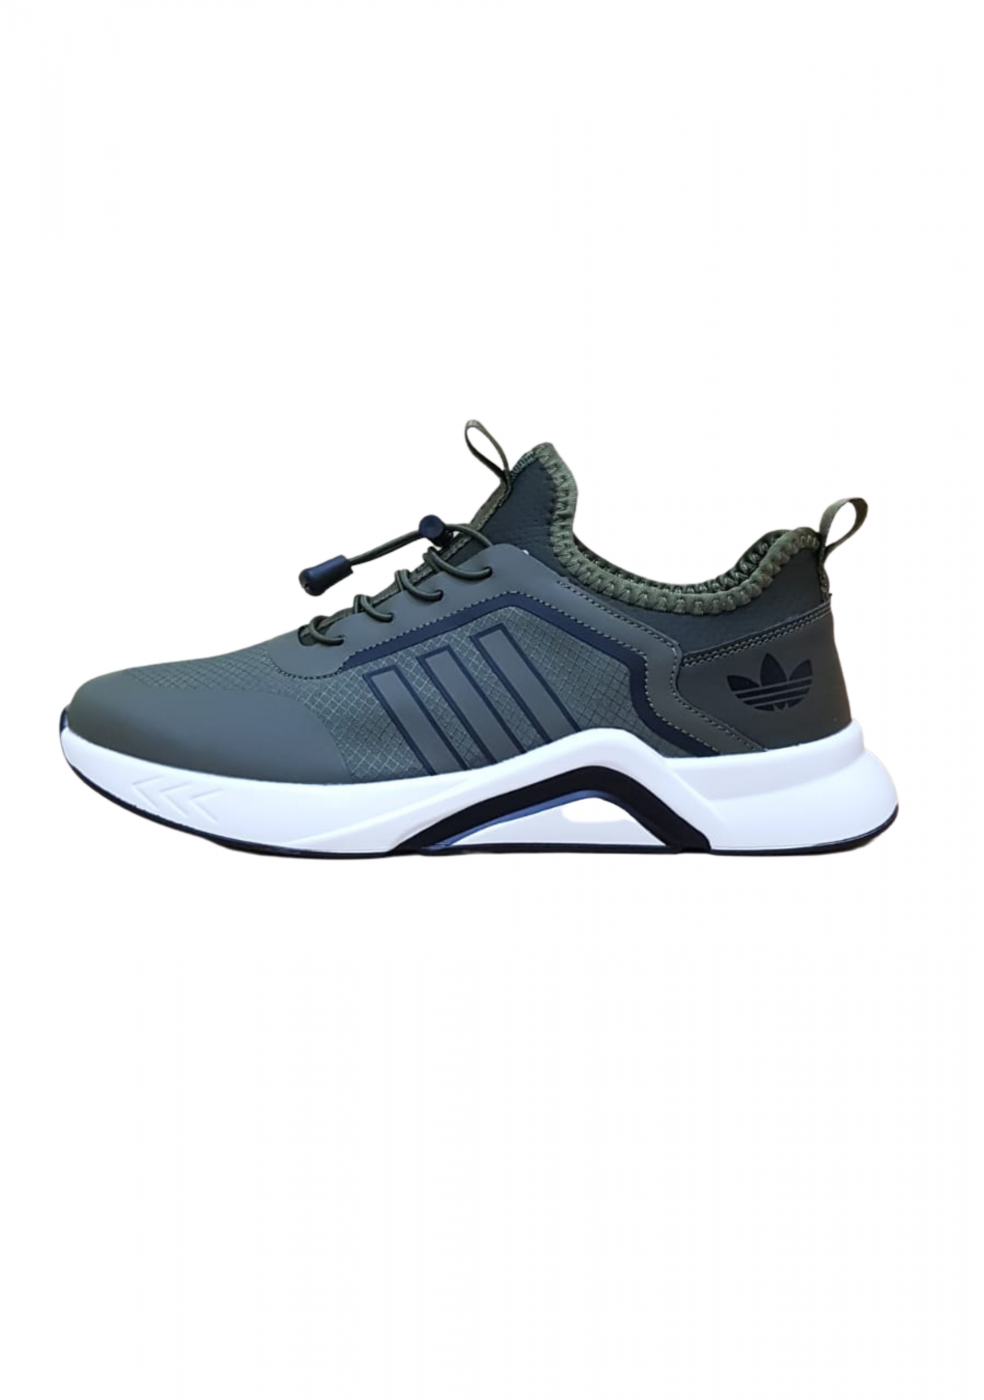 MAGNETT Army Green Sports Shoes For Men